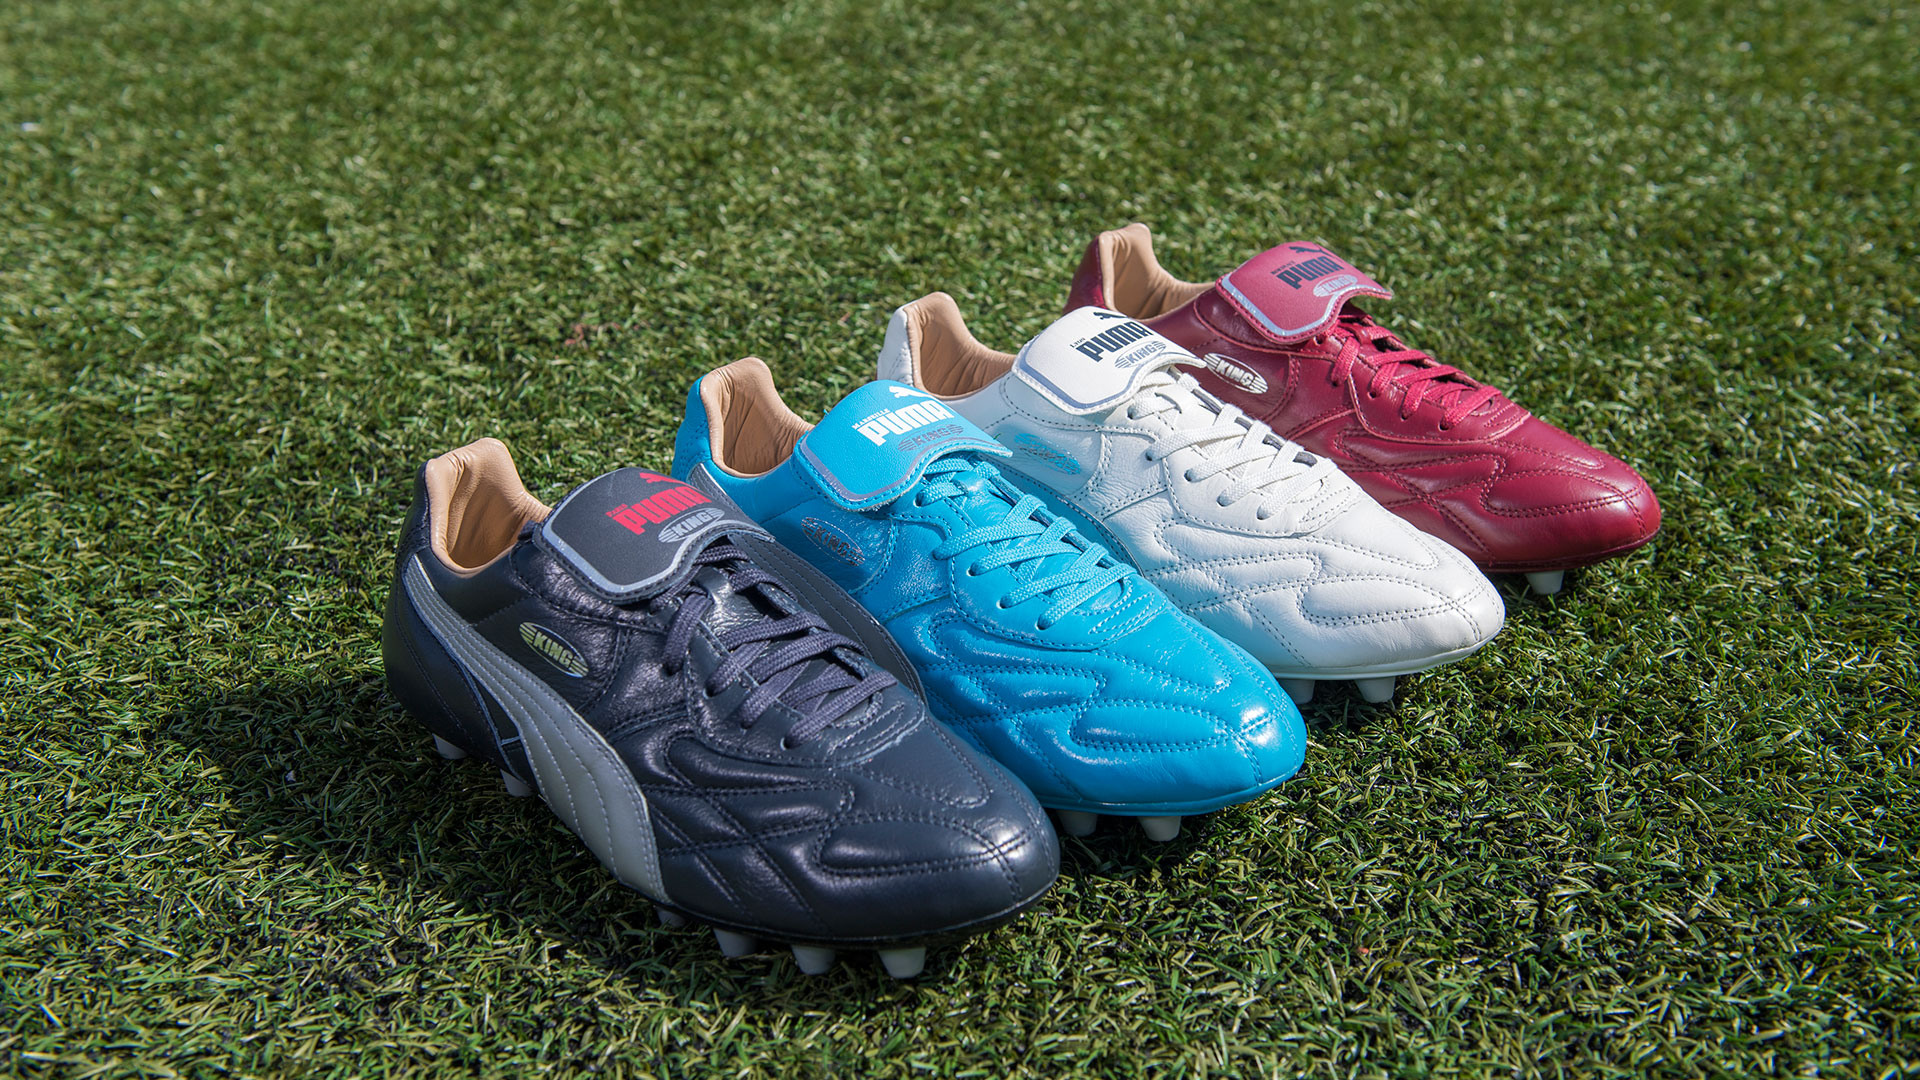 PUMA King Top City Pack pays tribute to 